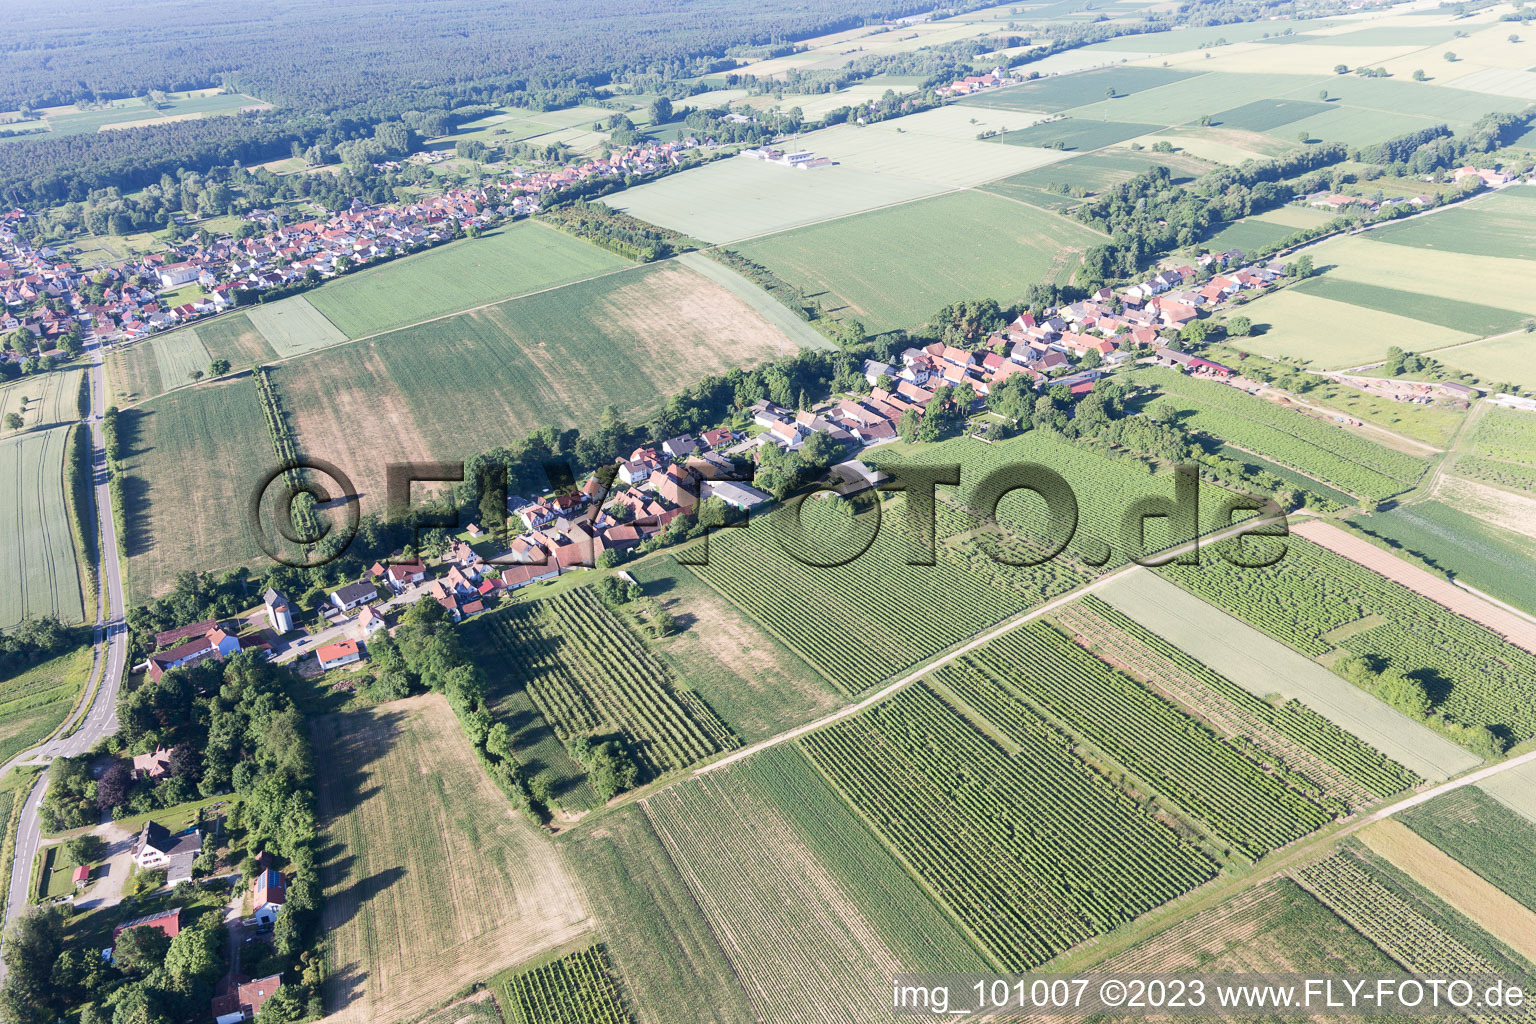 Bird's eye view of Vollmersweiler in the state Rhineland-Palatinate, Germany